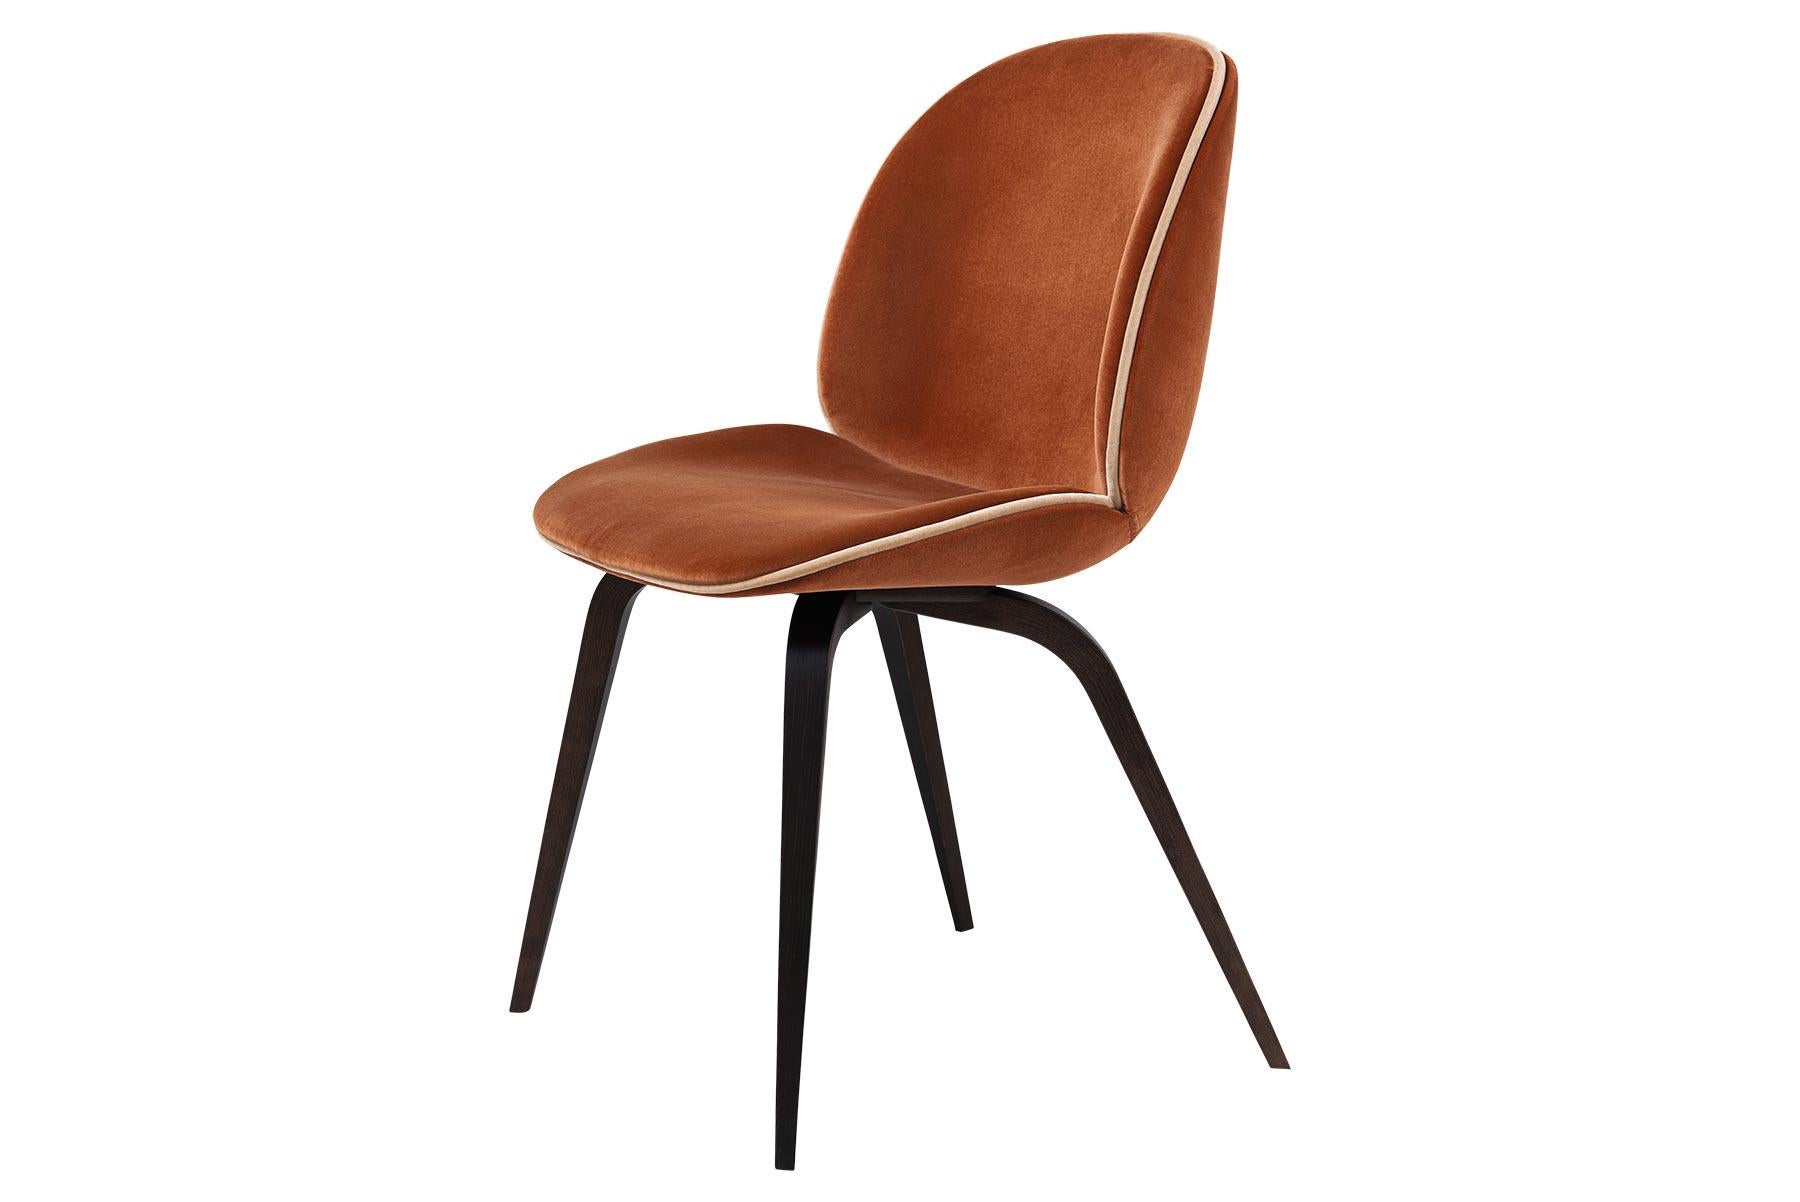 Beetle Dining Chair, Fully Upholstered, Natural Oak In New Condition For Sale In Berkeley, CA